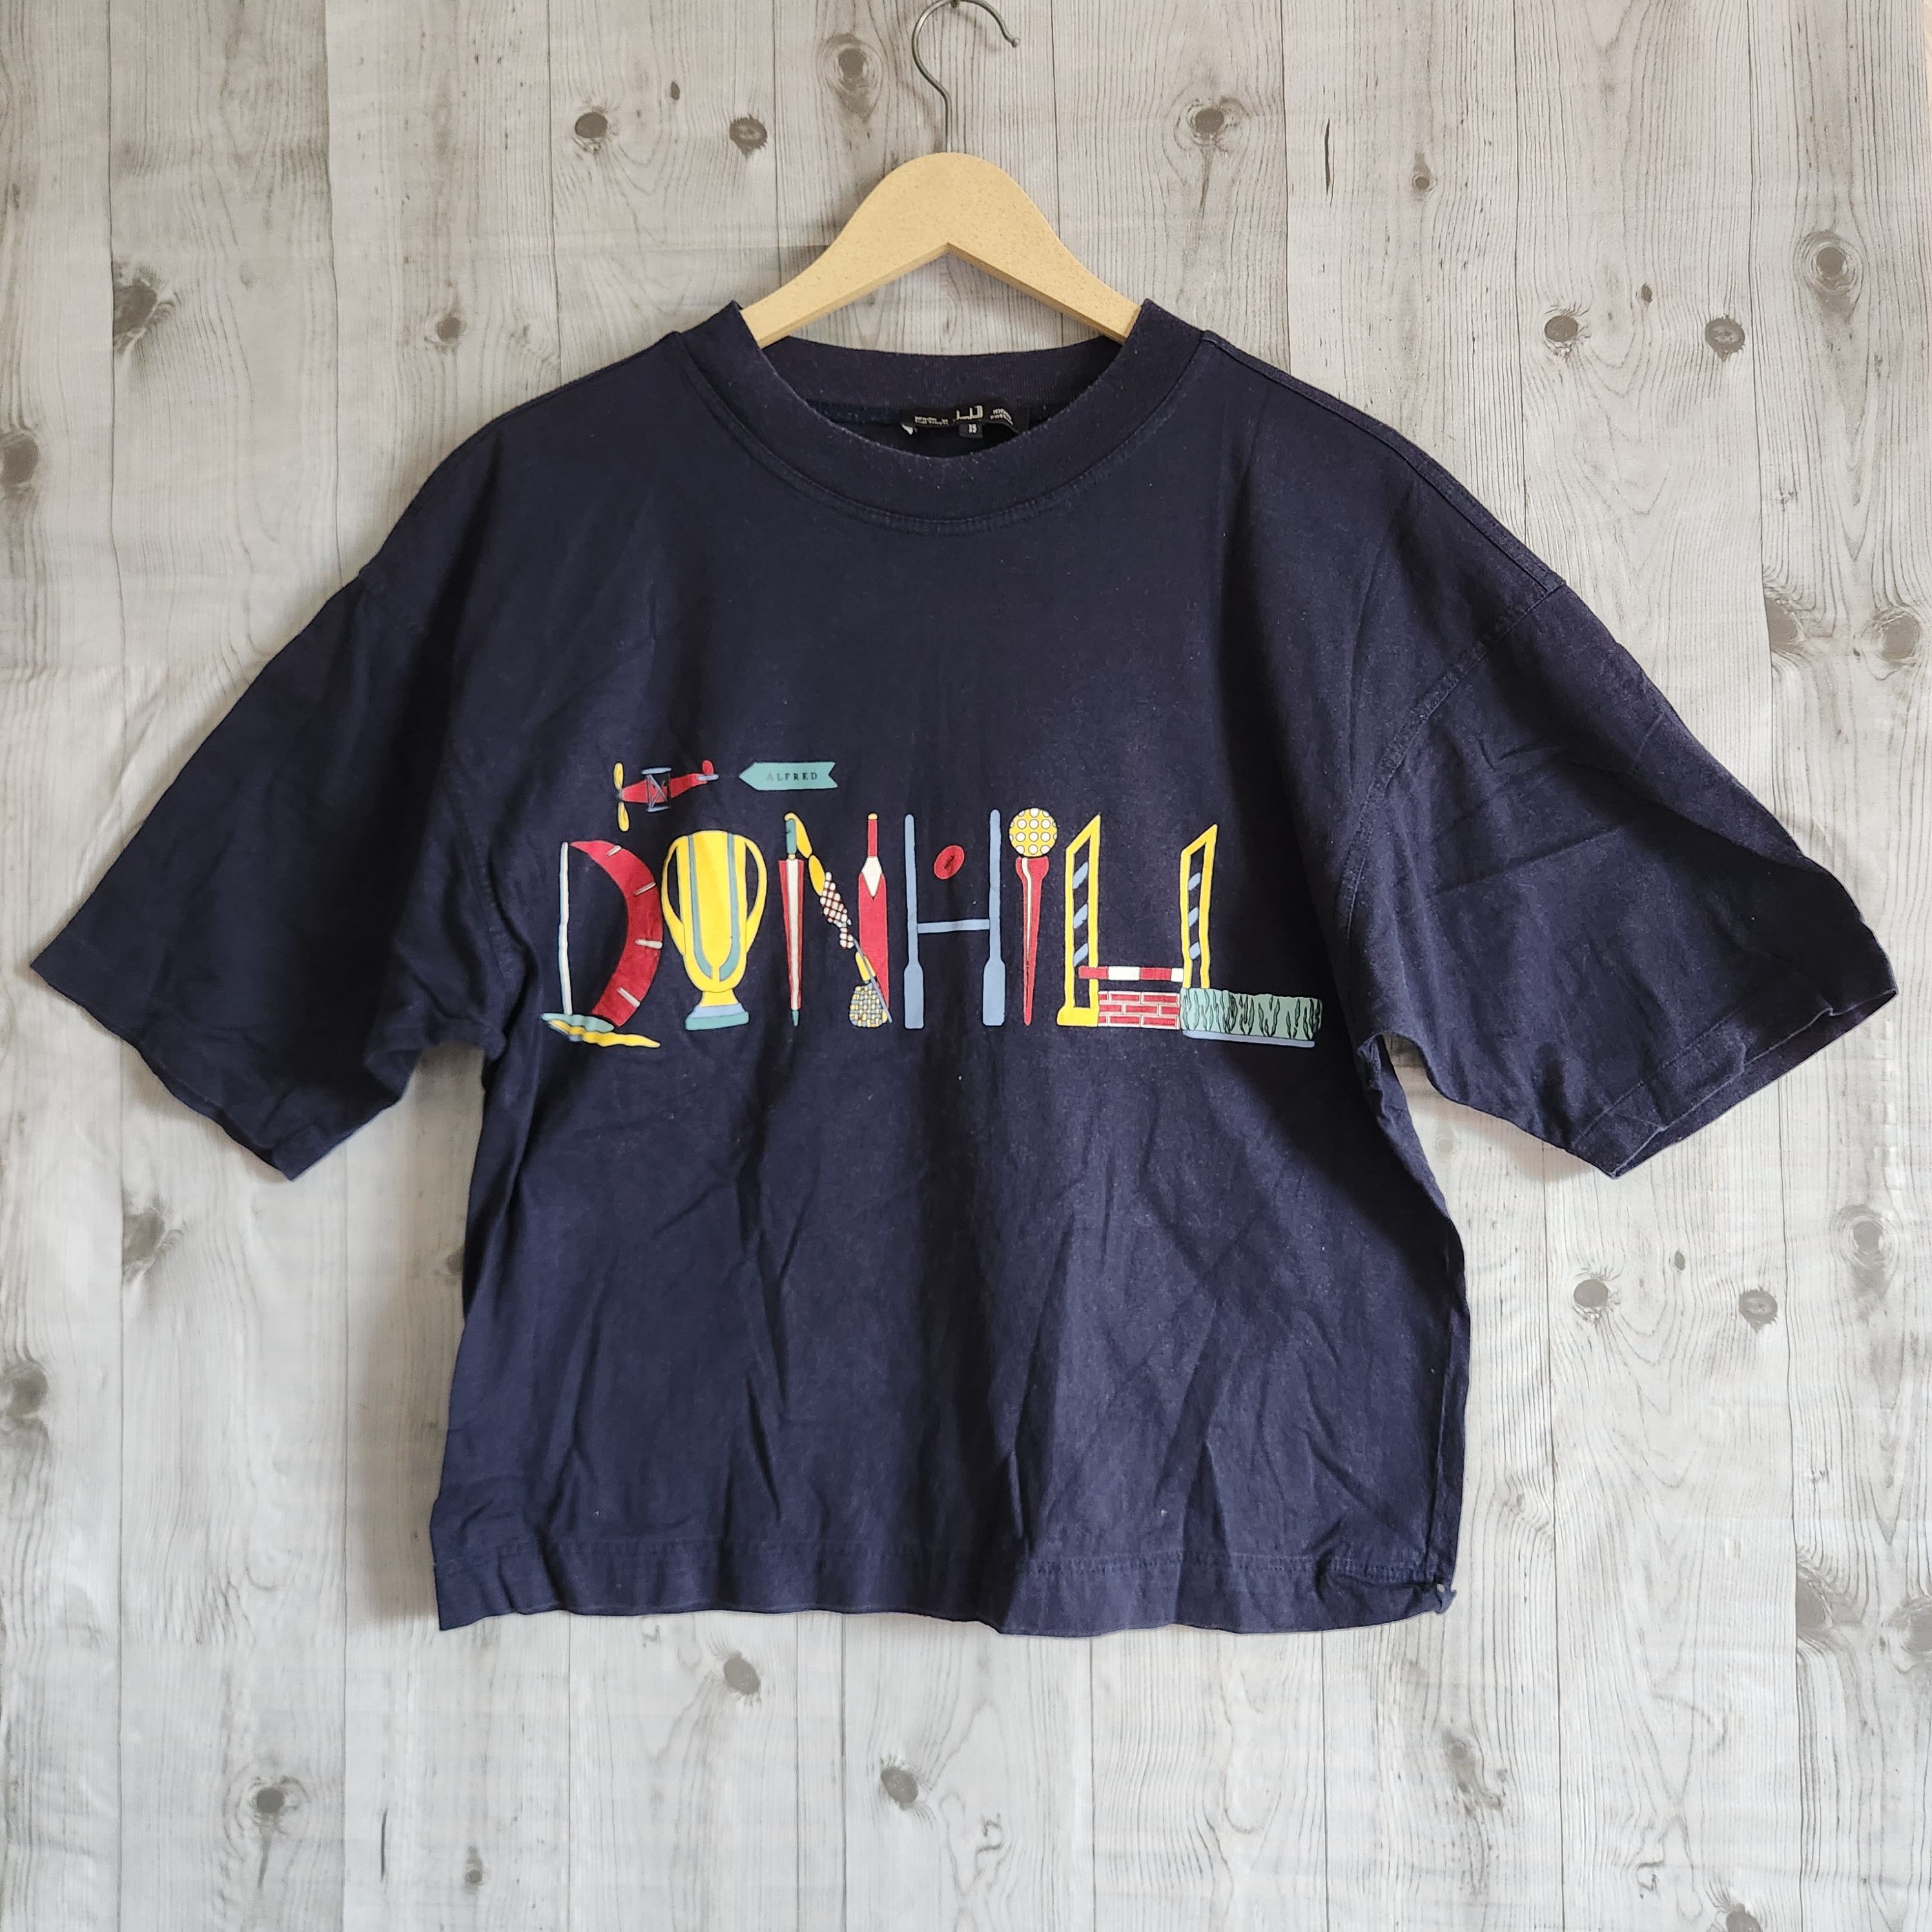 Vintage 1980s Alfred Dunhill TShirt Single Stitches - 1